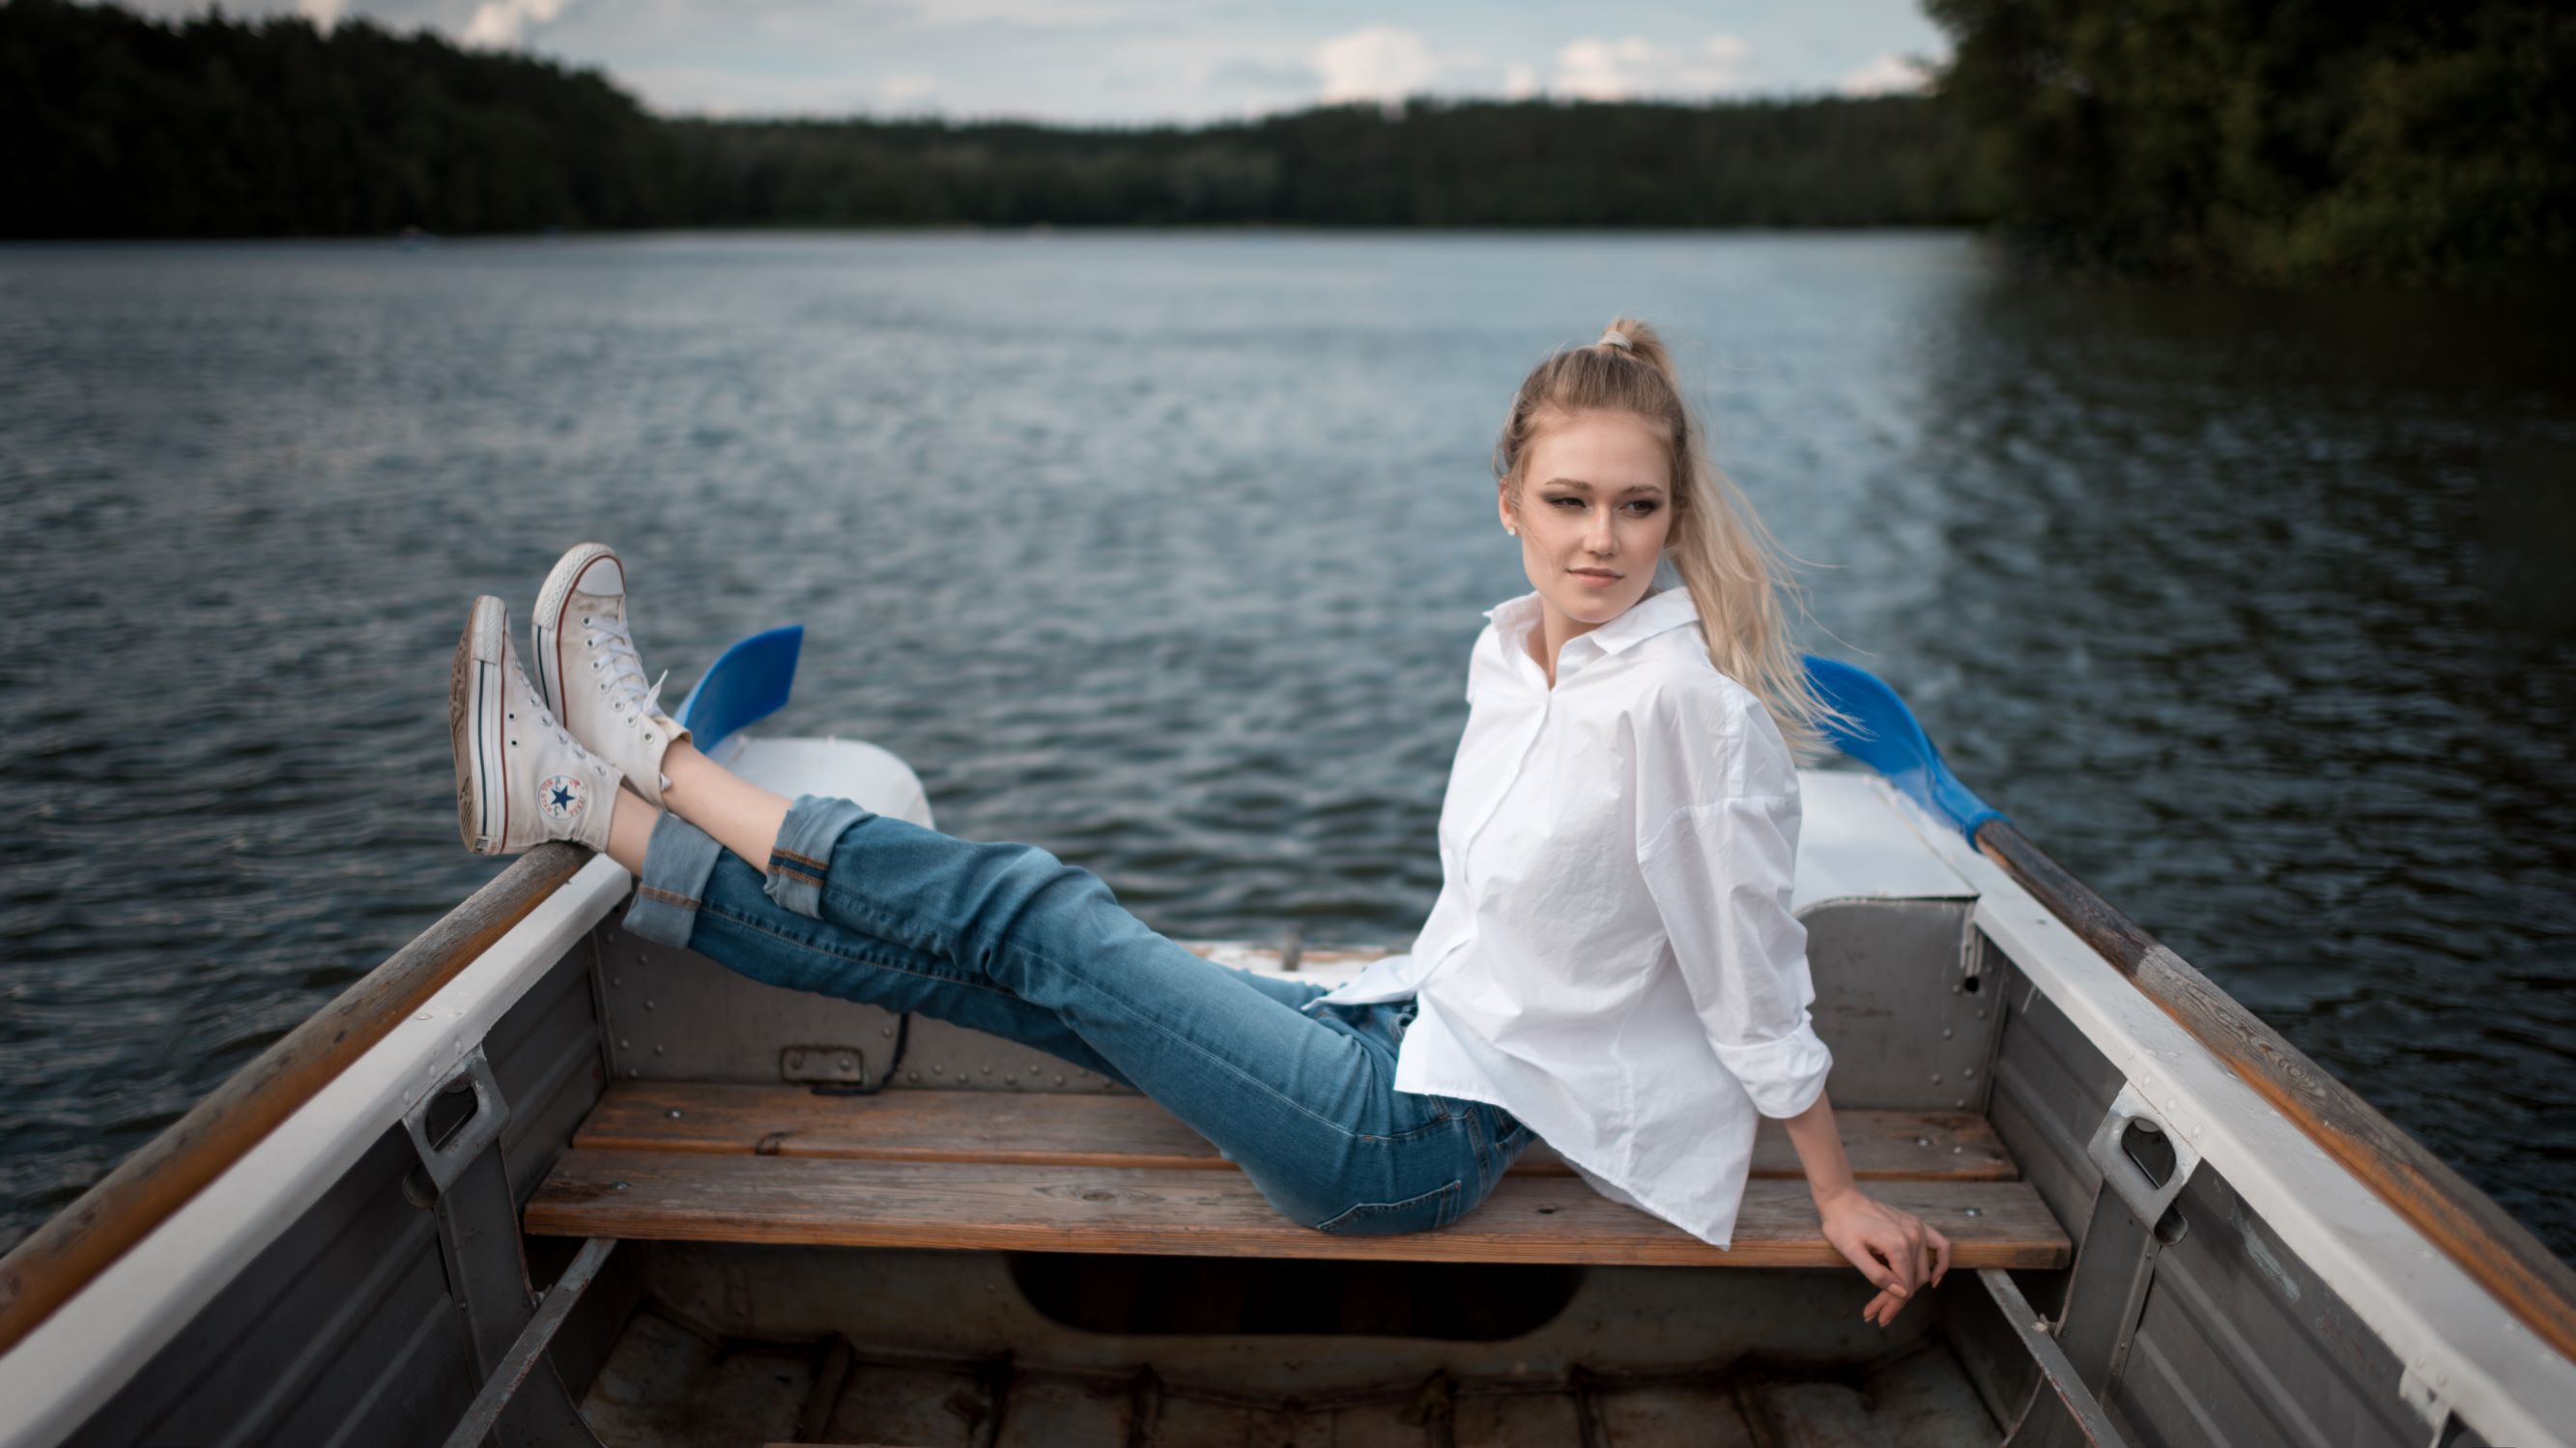 портрет, арт, portrait, model, People, One Person, Outdoors, Sitting, Leisure Activity, Day, Relaxation, Nature, Lake, Vacations, Casual Clothing, Water, Lifestyles, Nautical Vessel, Darius Main